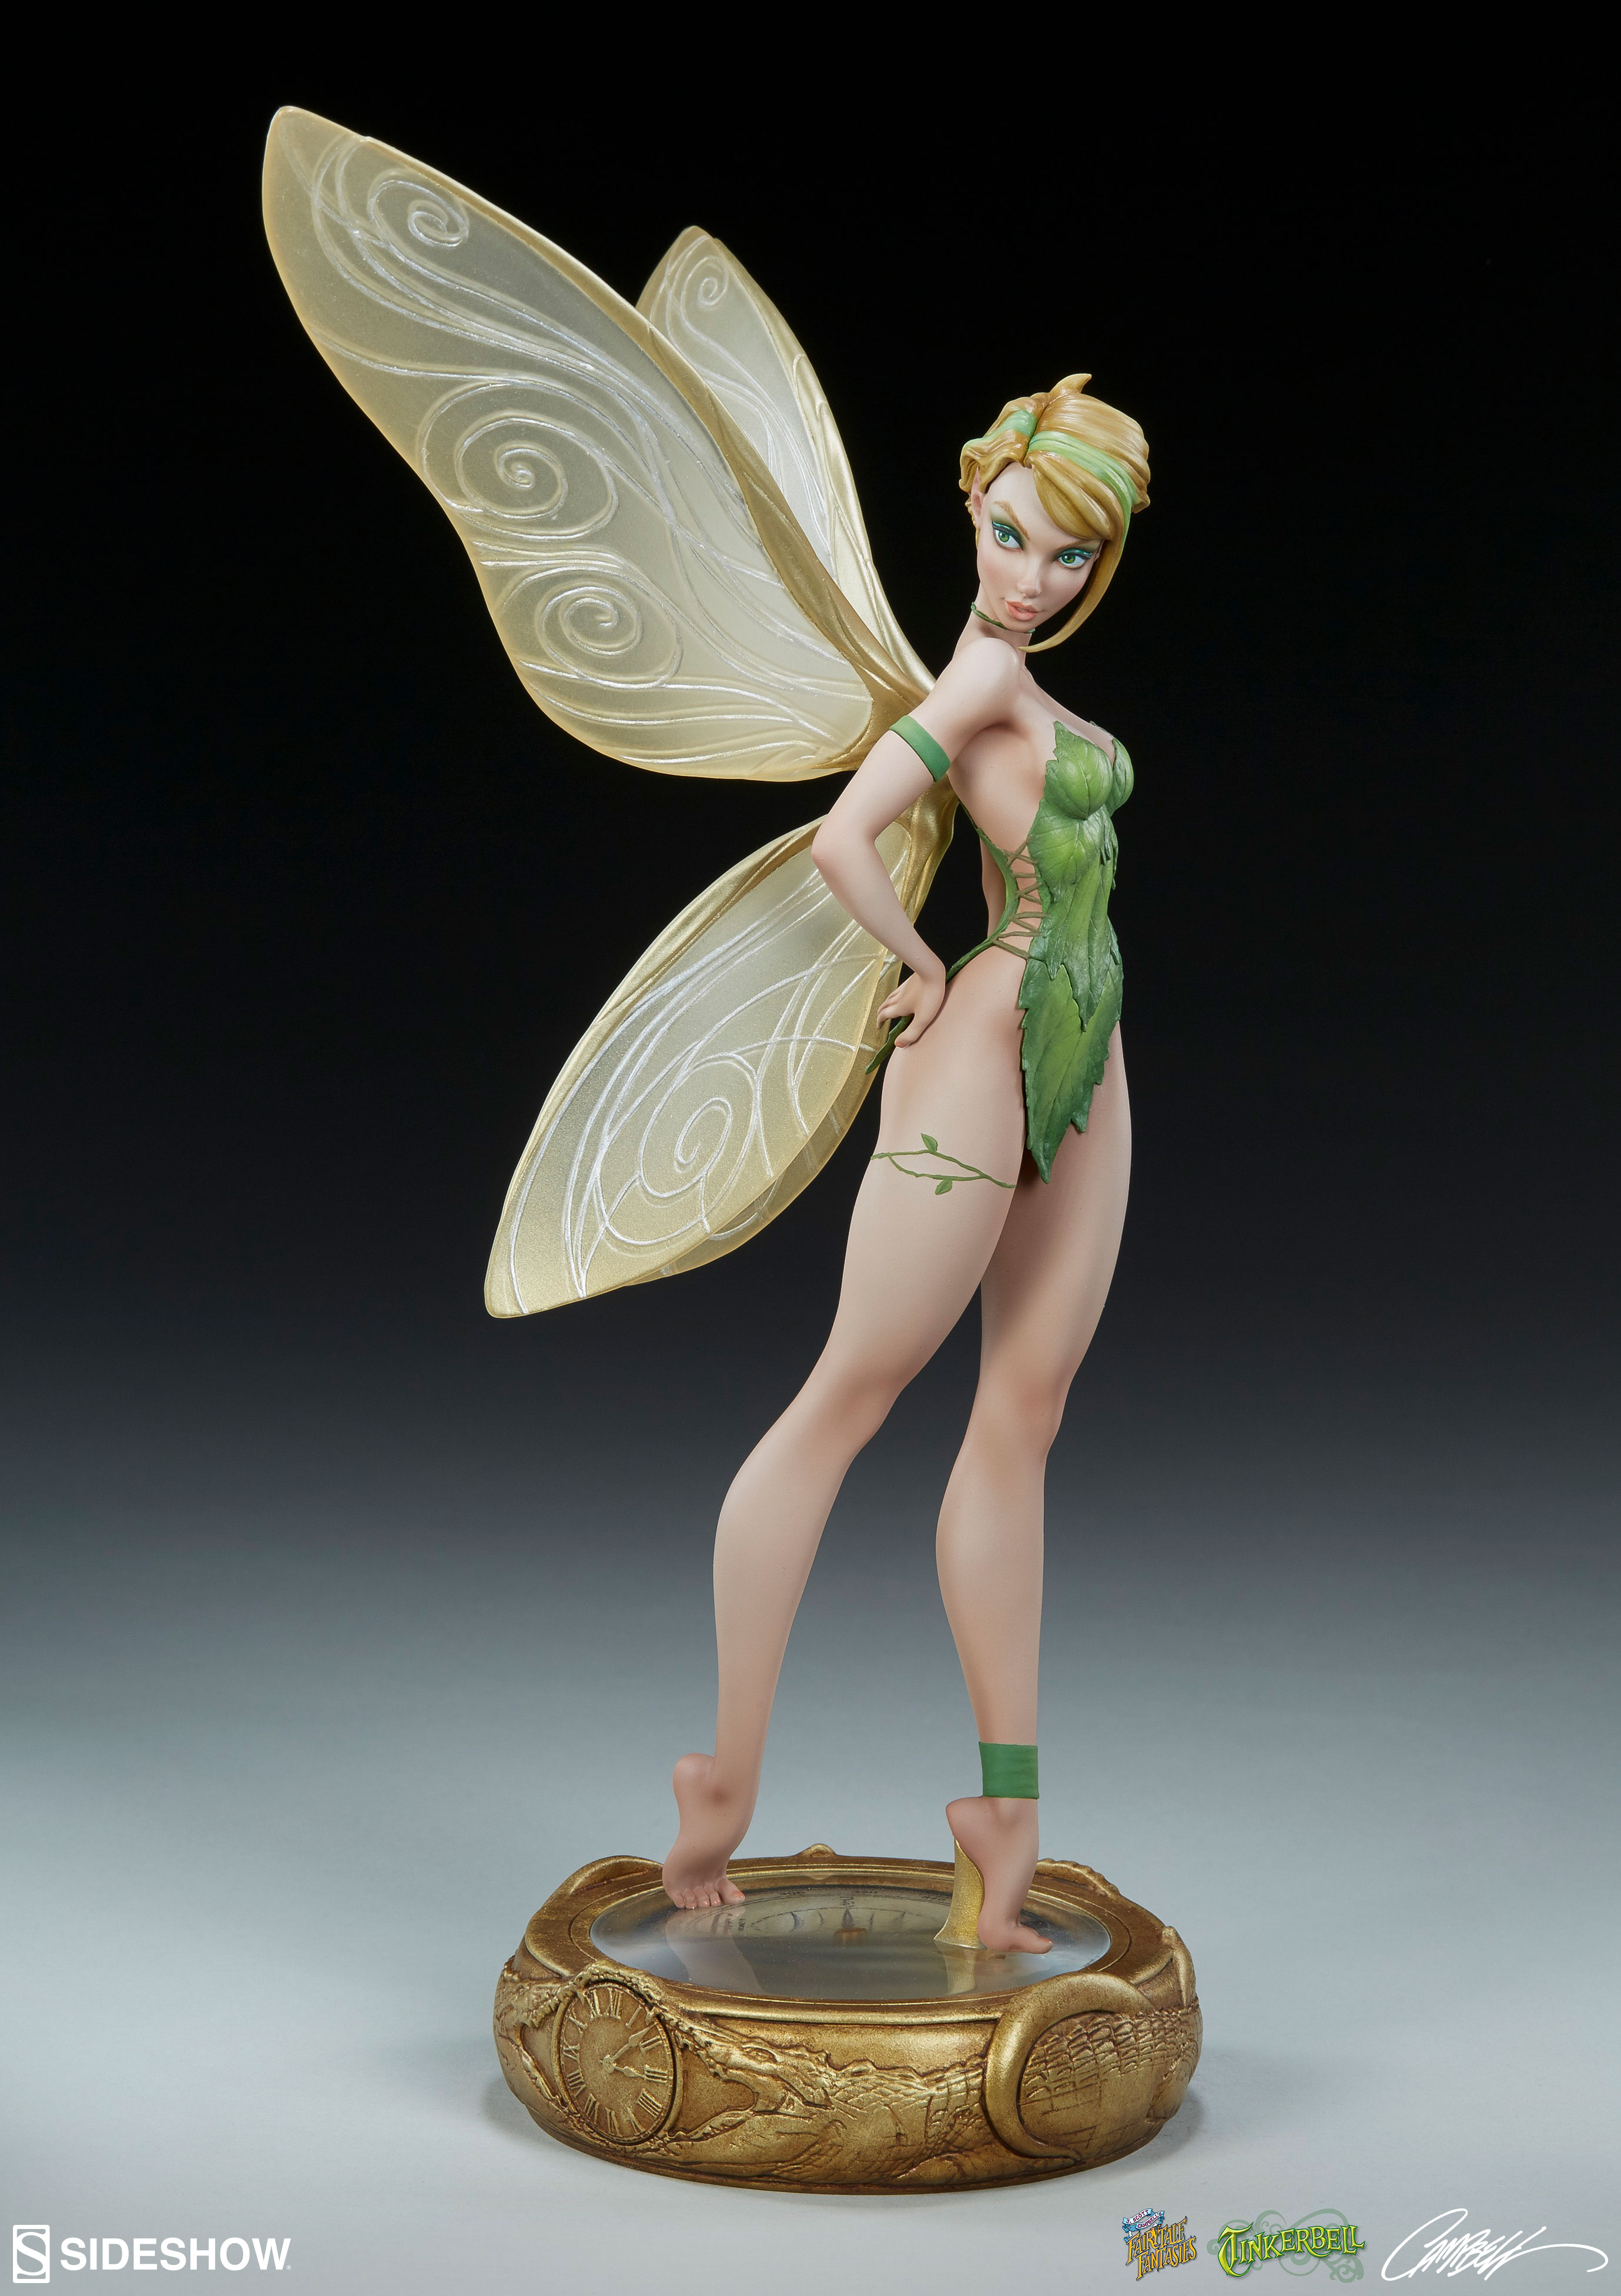 Spread your wings and welcome the Tinkerbell Statue to your collection toda...